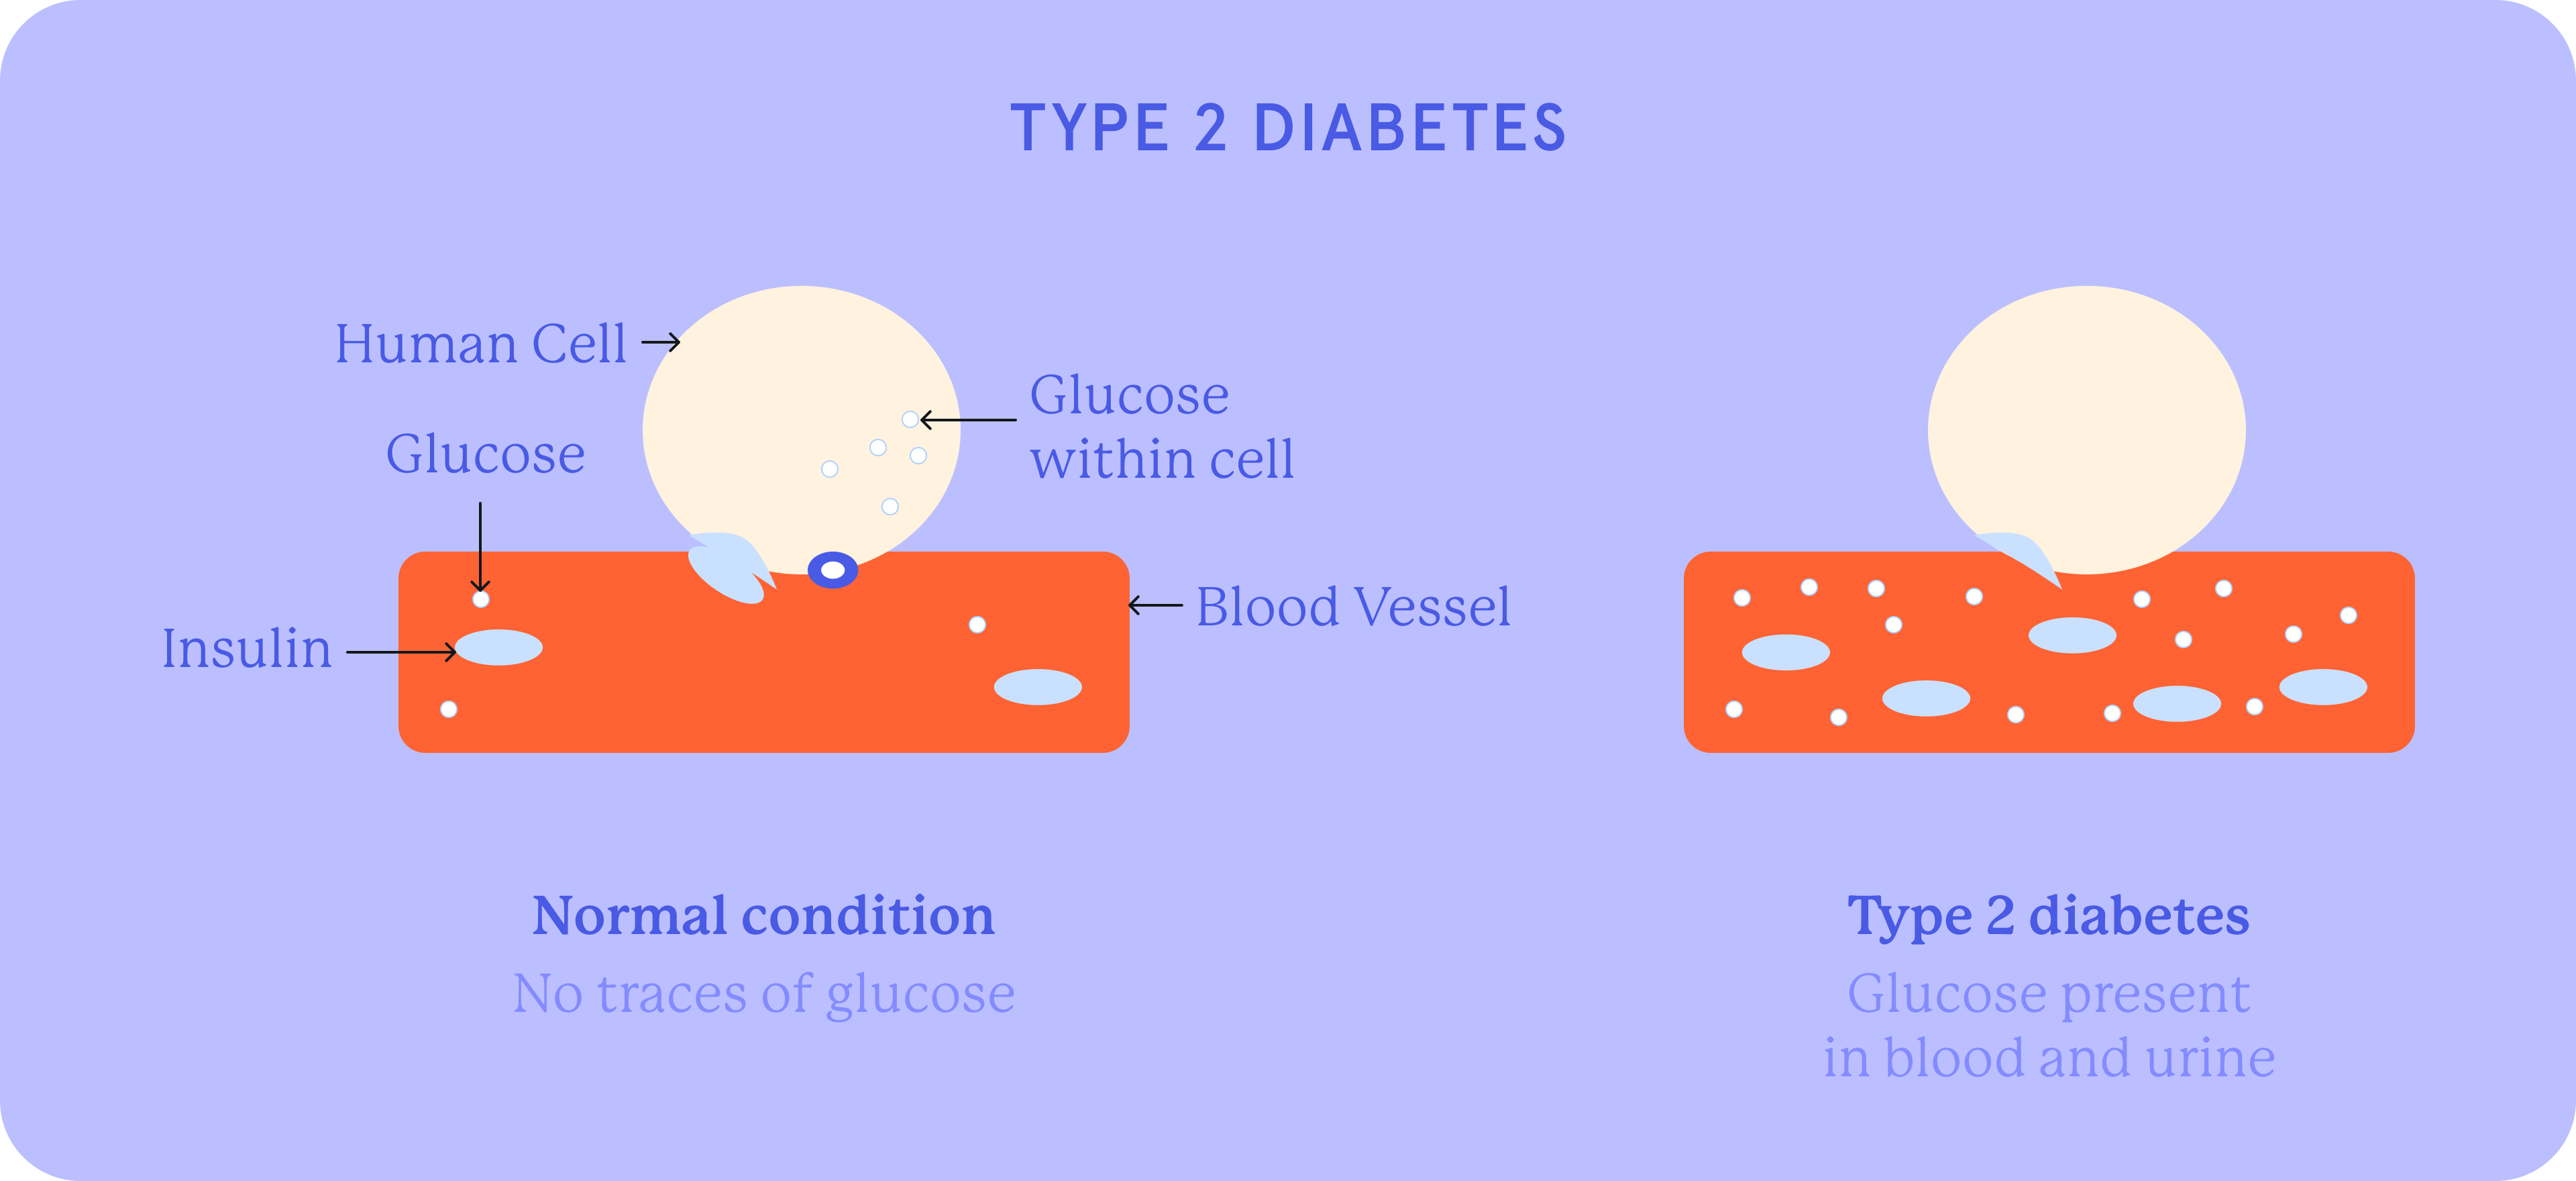 The mechanism explains glucose saturation in blood and urine and the absence of glucose traces seen in normal conditions. 